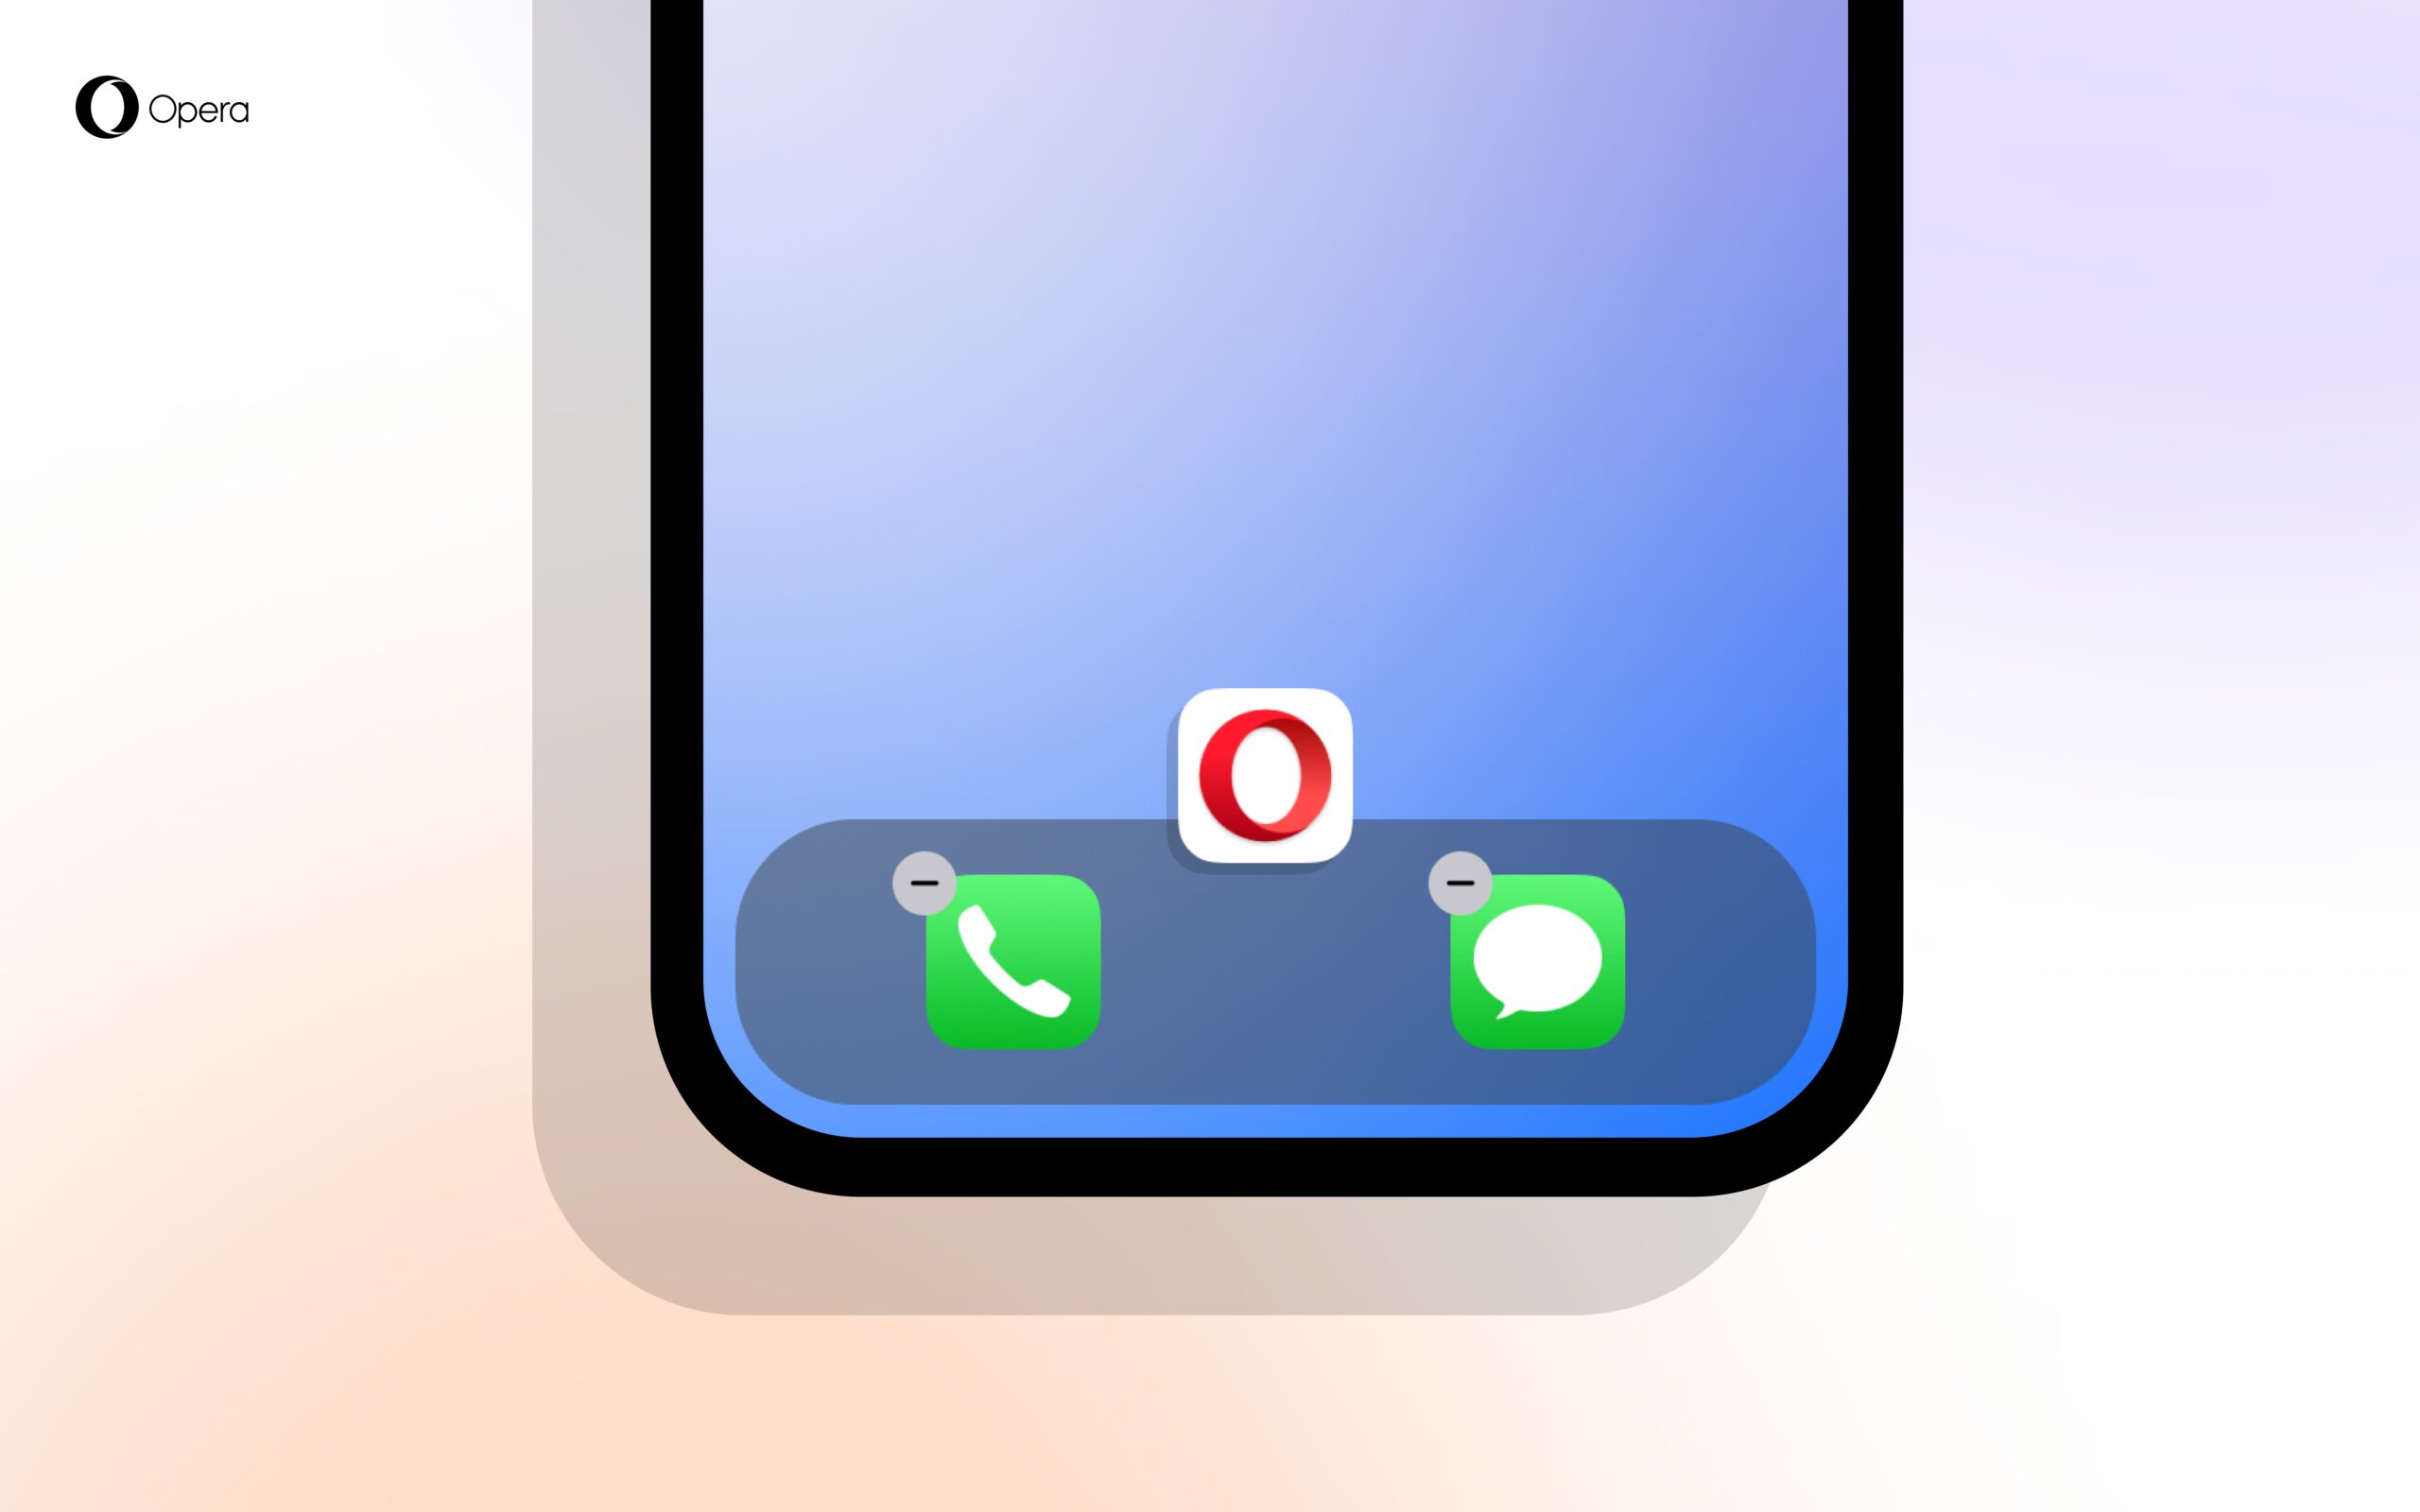 A phone screen shows Opera being chosen as the default browser.